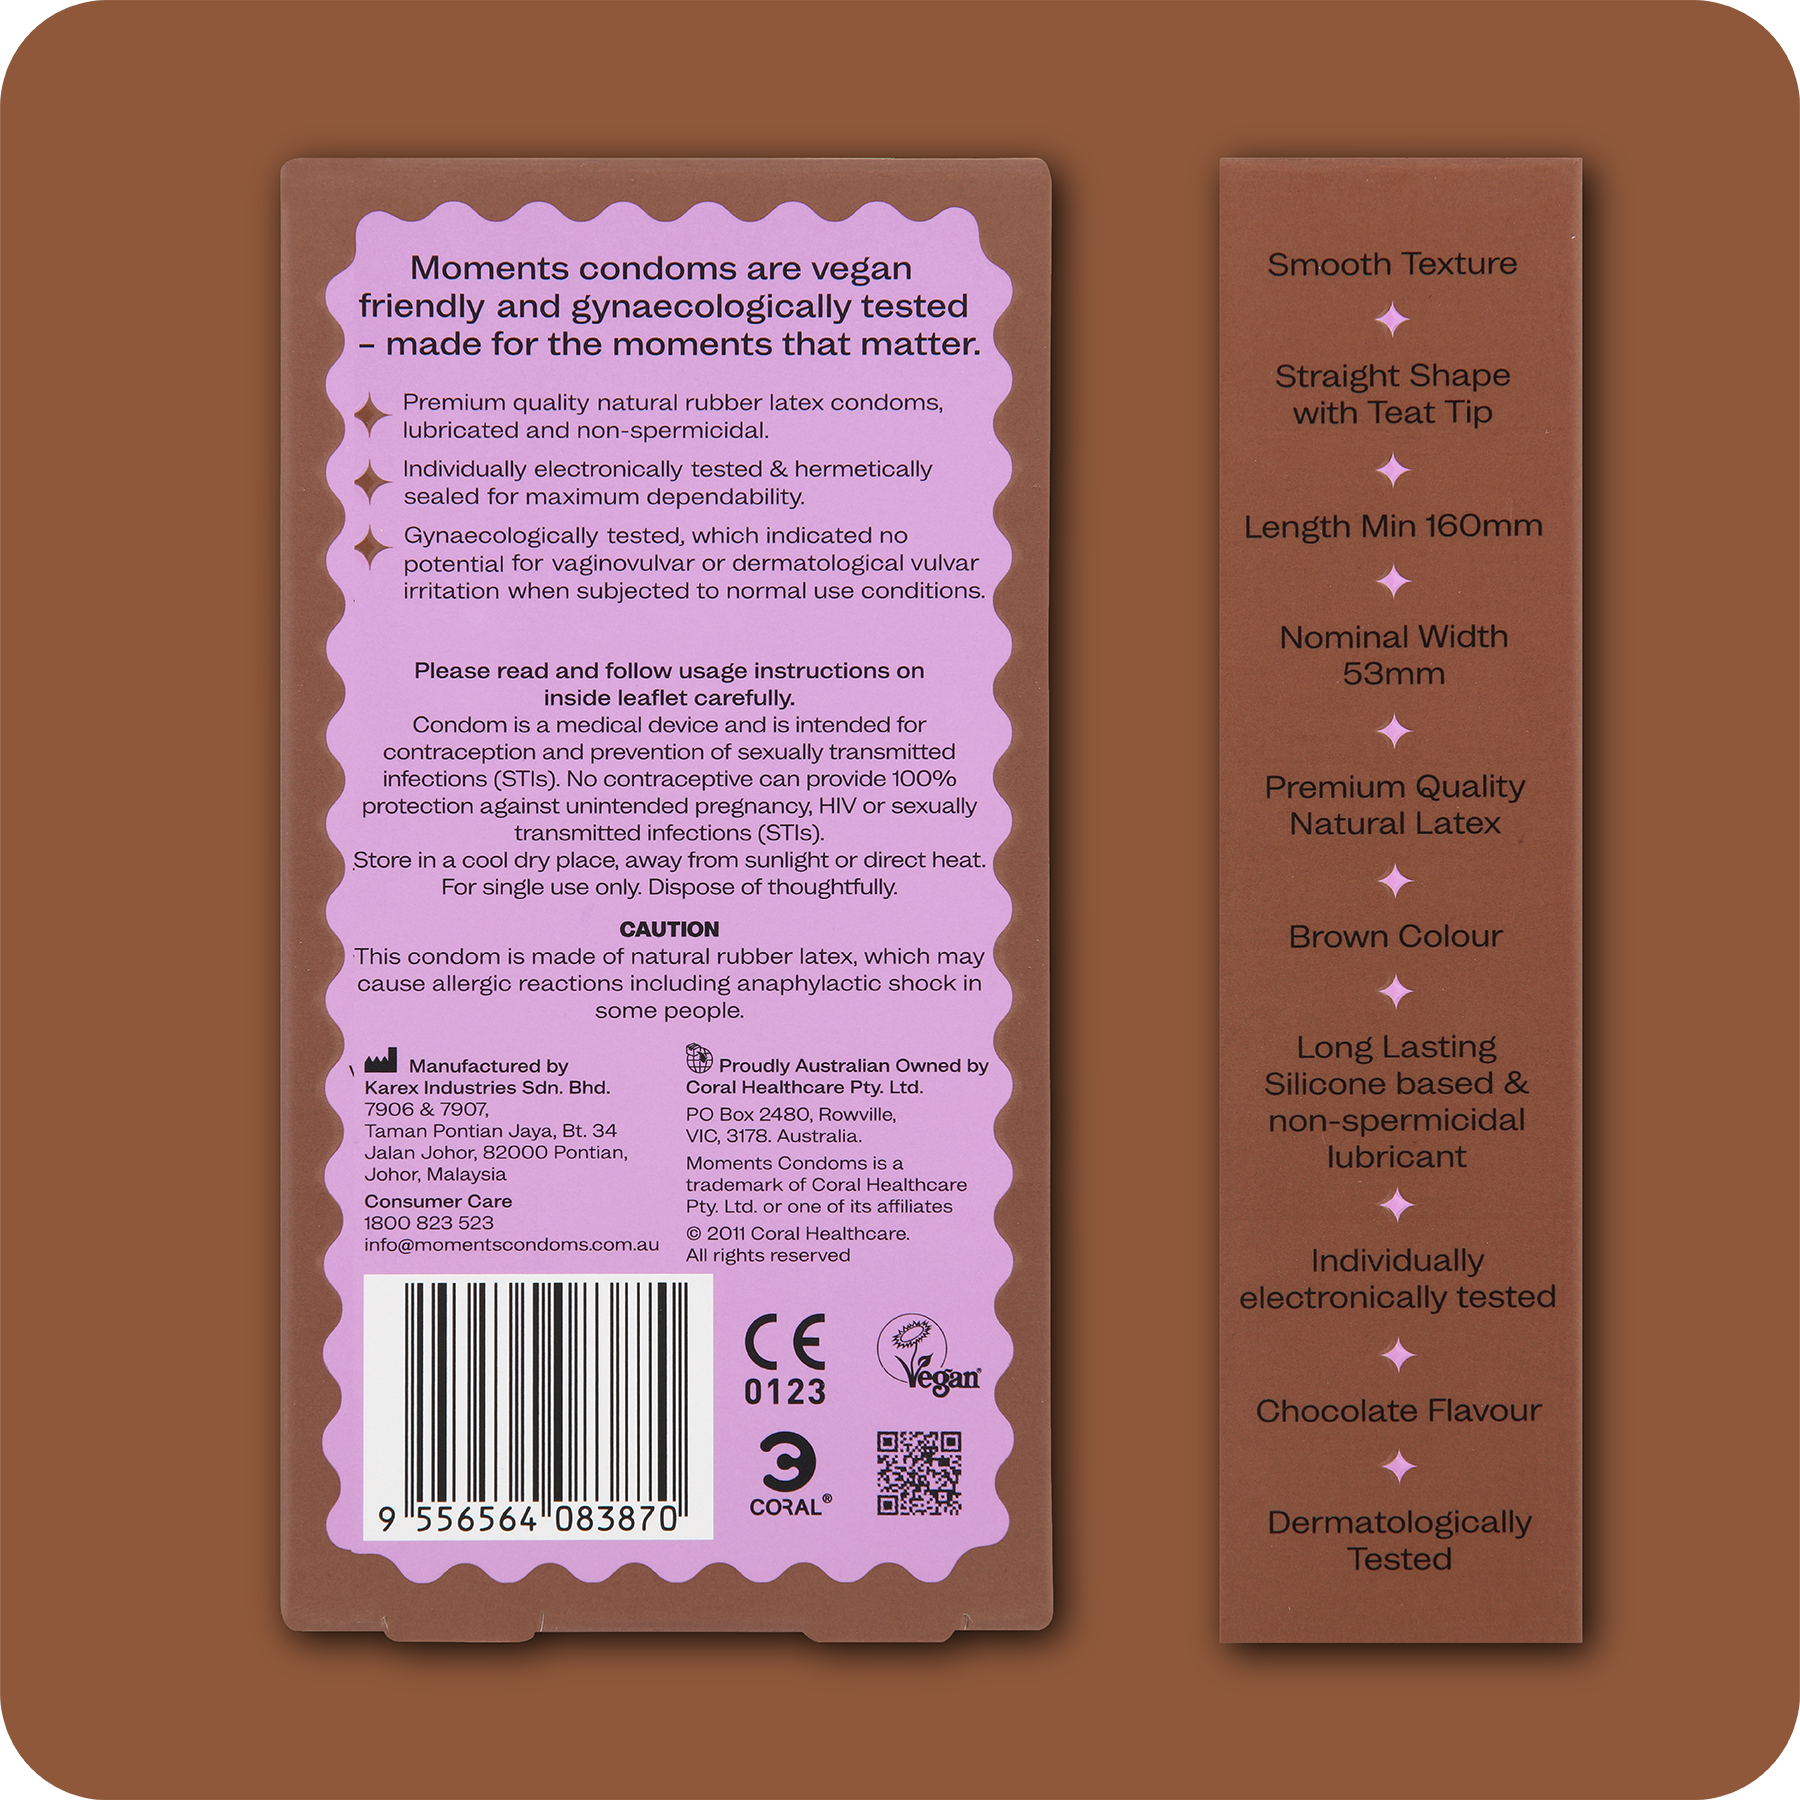 Brand information on the back of Moments Chocolate flavoured condoms